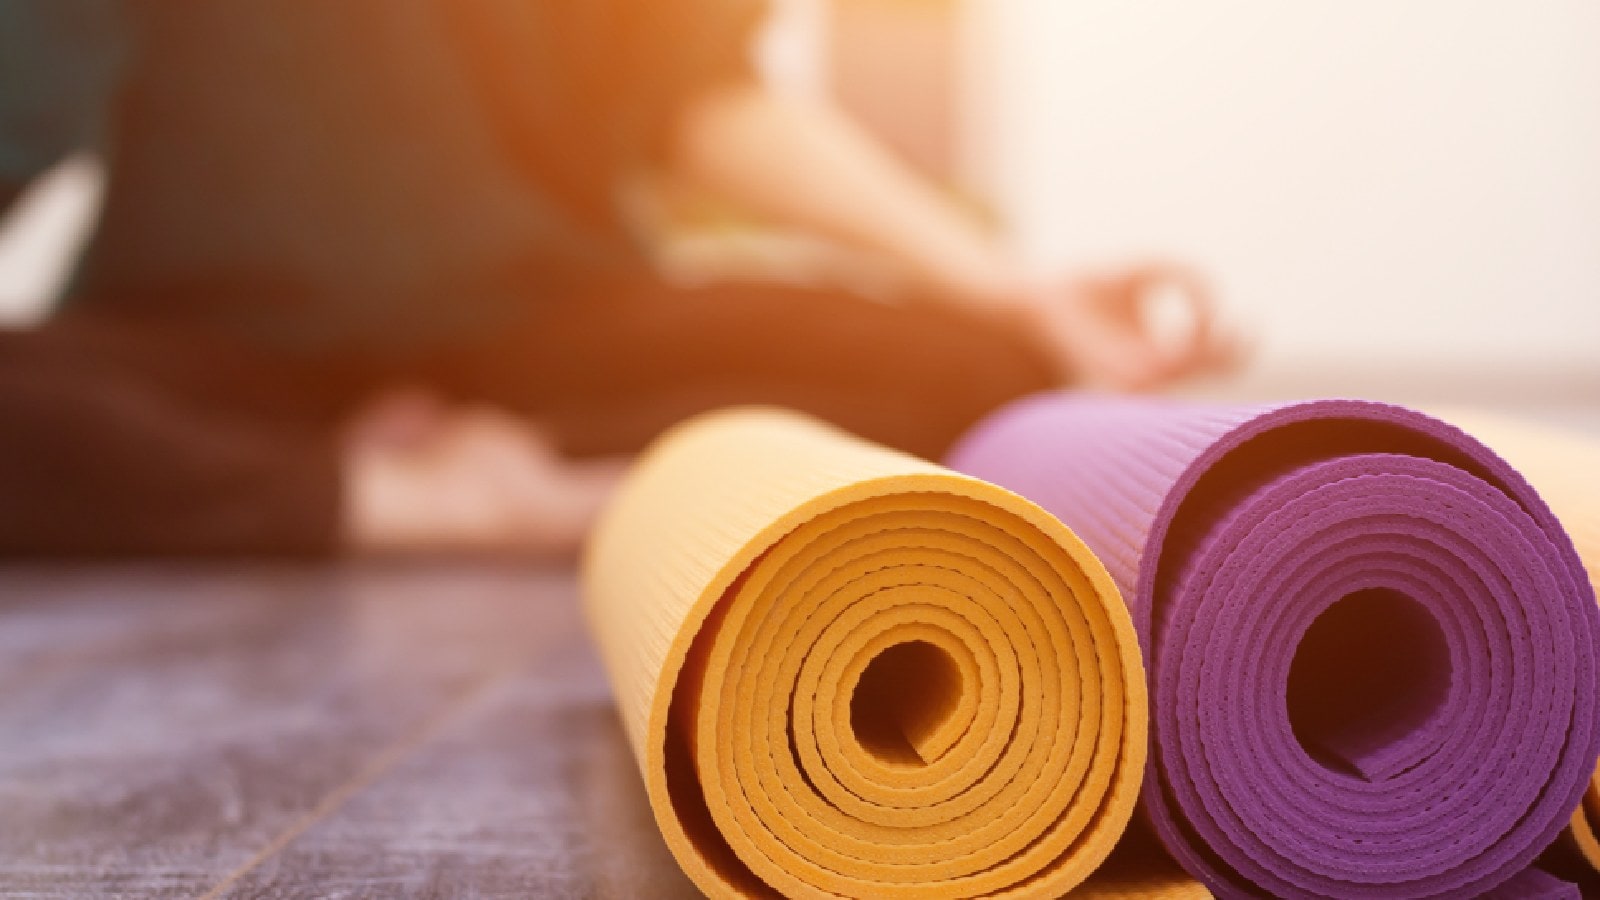 Discover the 5 Best Stylish Yoga Mats for Constant Support